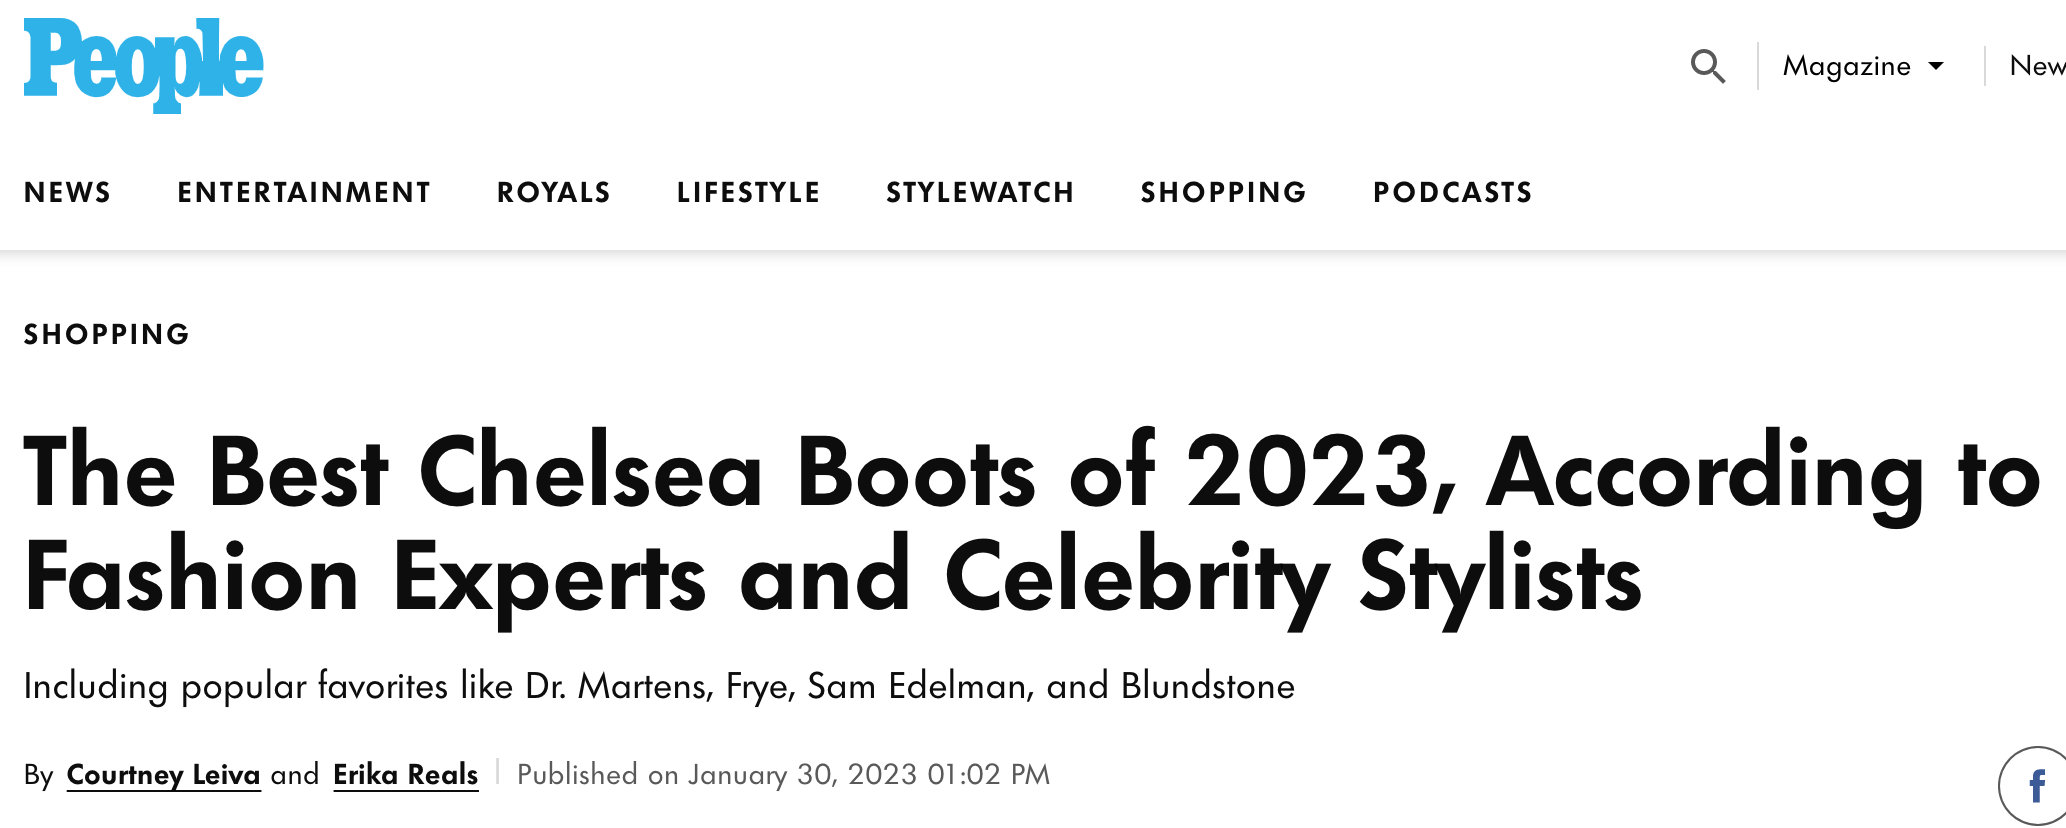 People The Best Chelsea Boots Of 2023, According To Fashion Experts And Celebrity Stylists